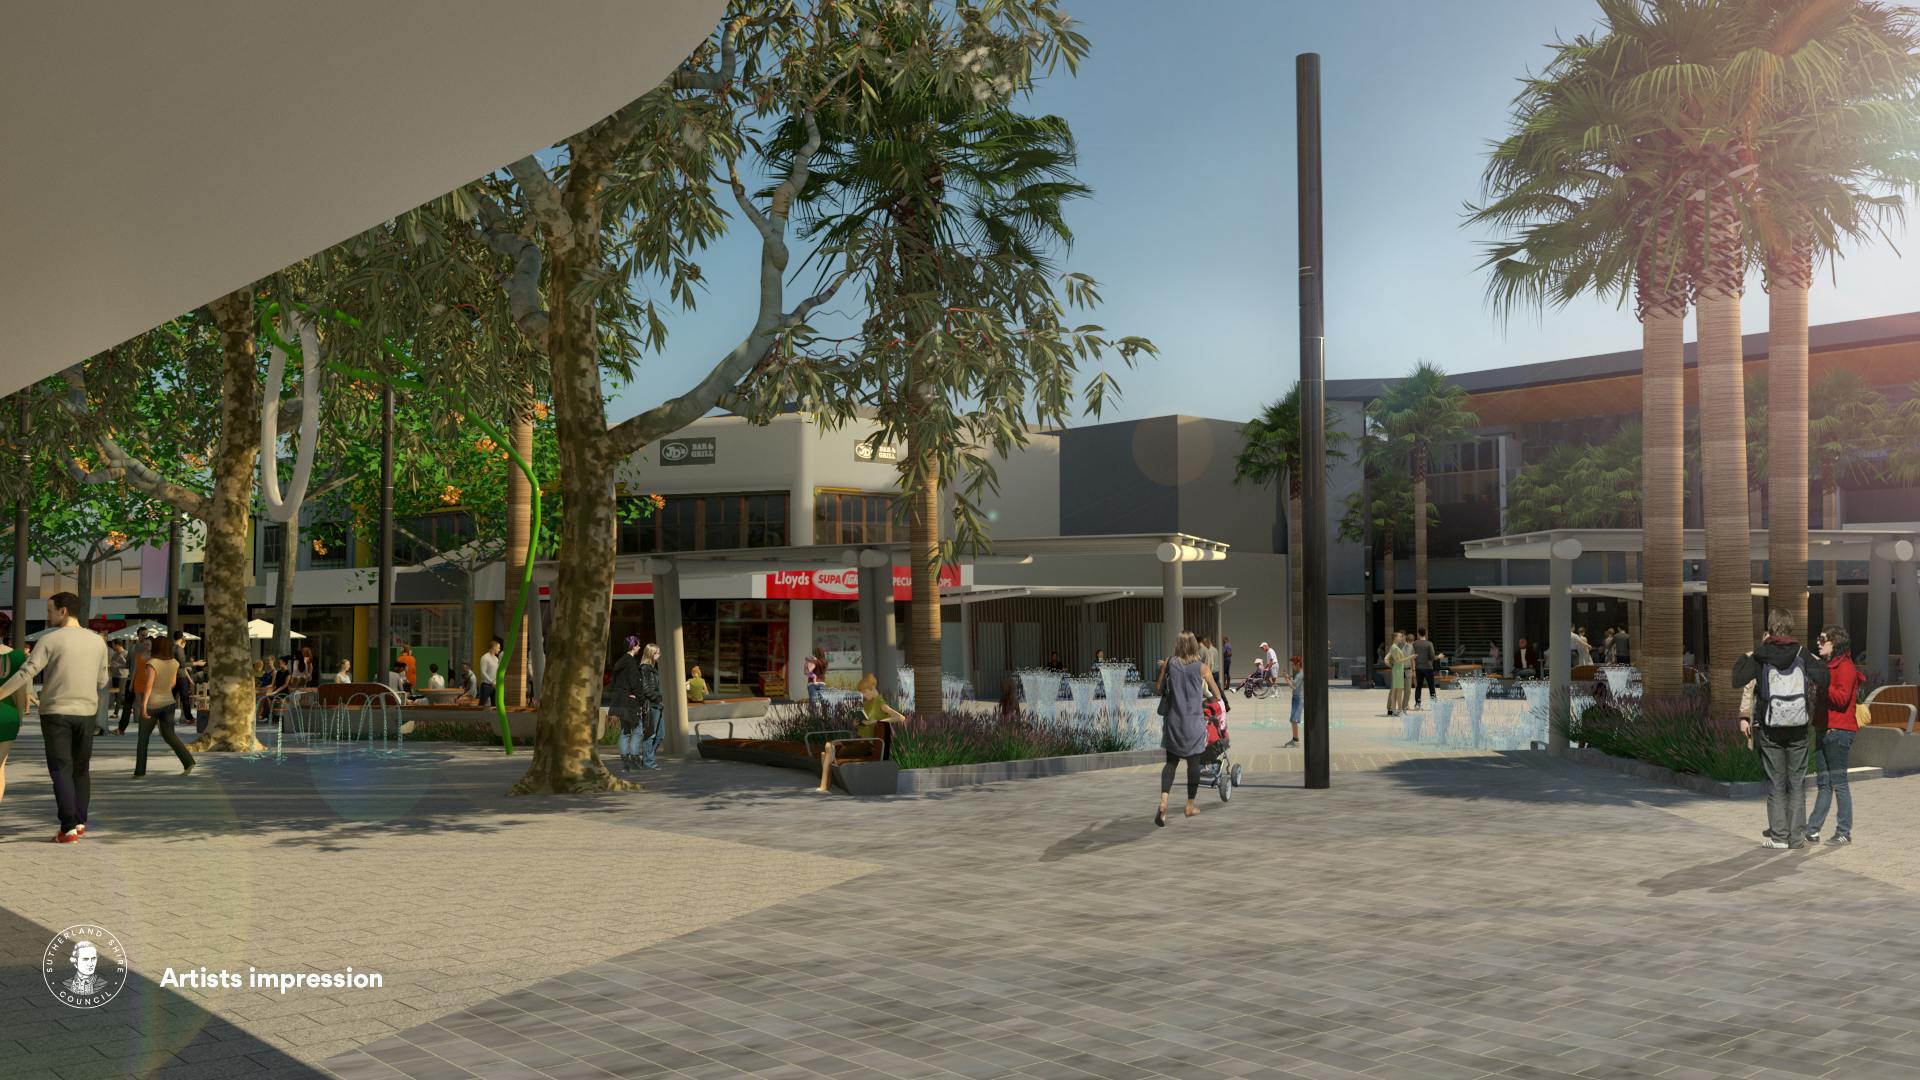 View of Cronulla Plaza from Cinema towards the Square